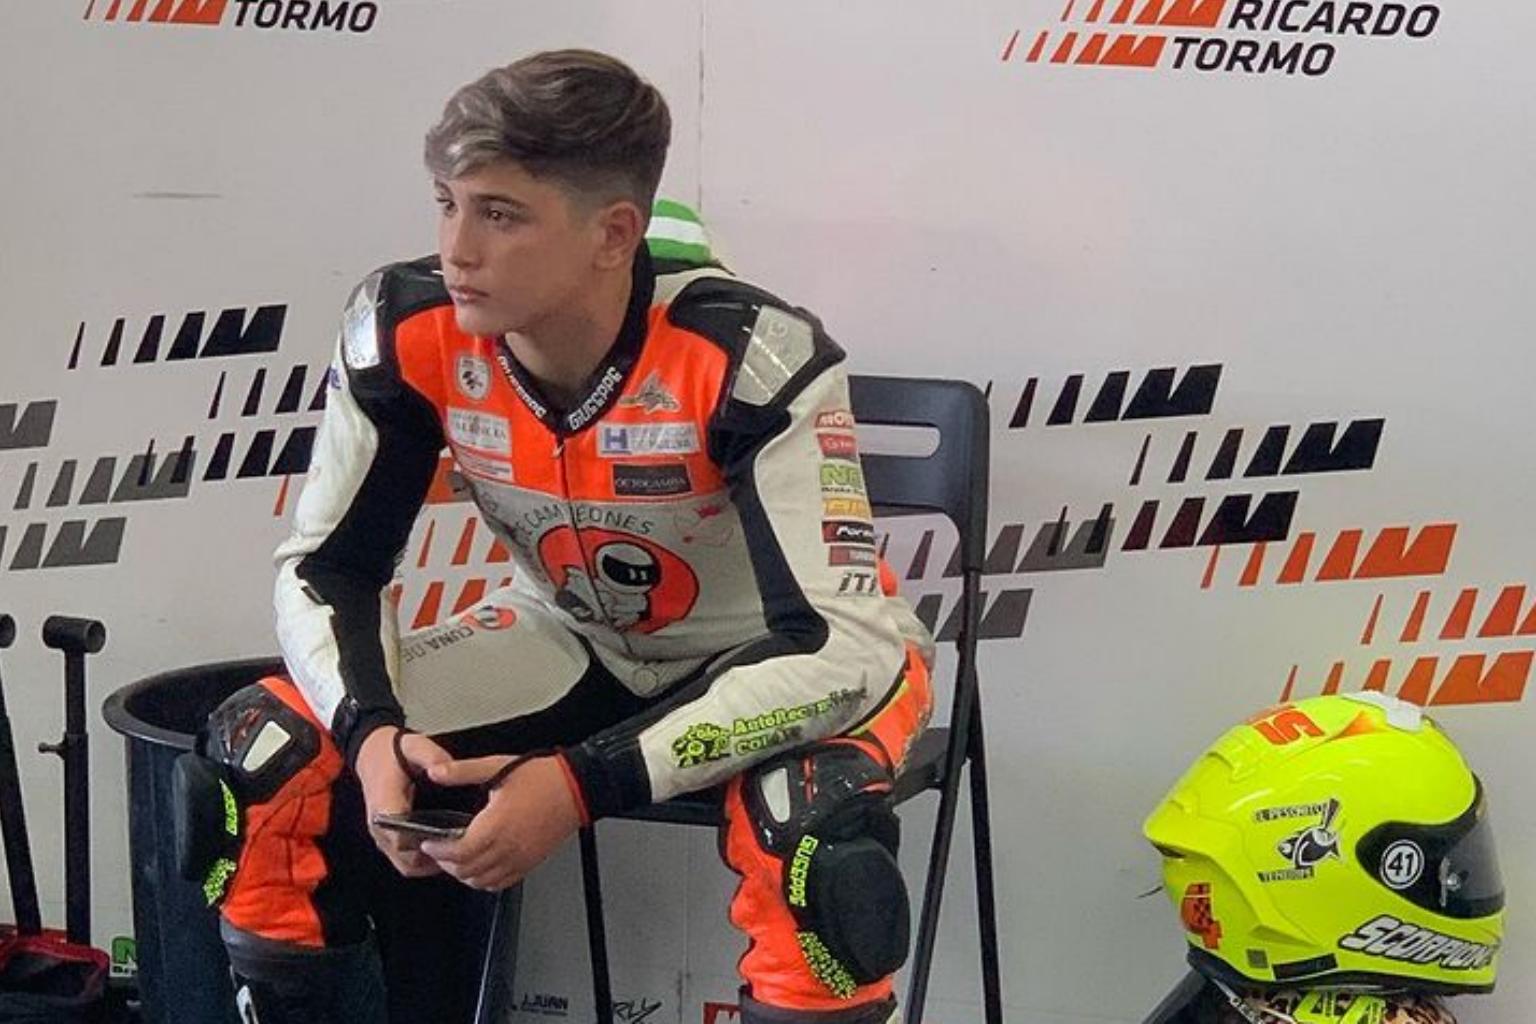 Hugo Millan, waiting on track day in full leathers.